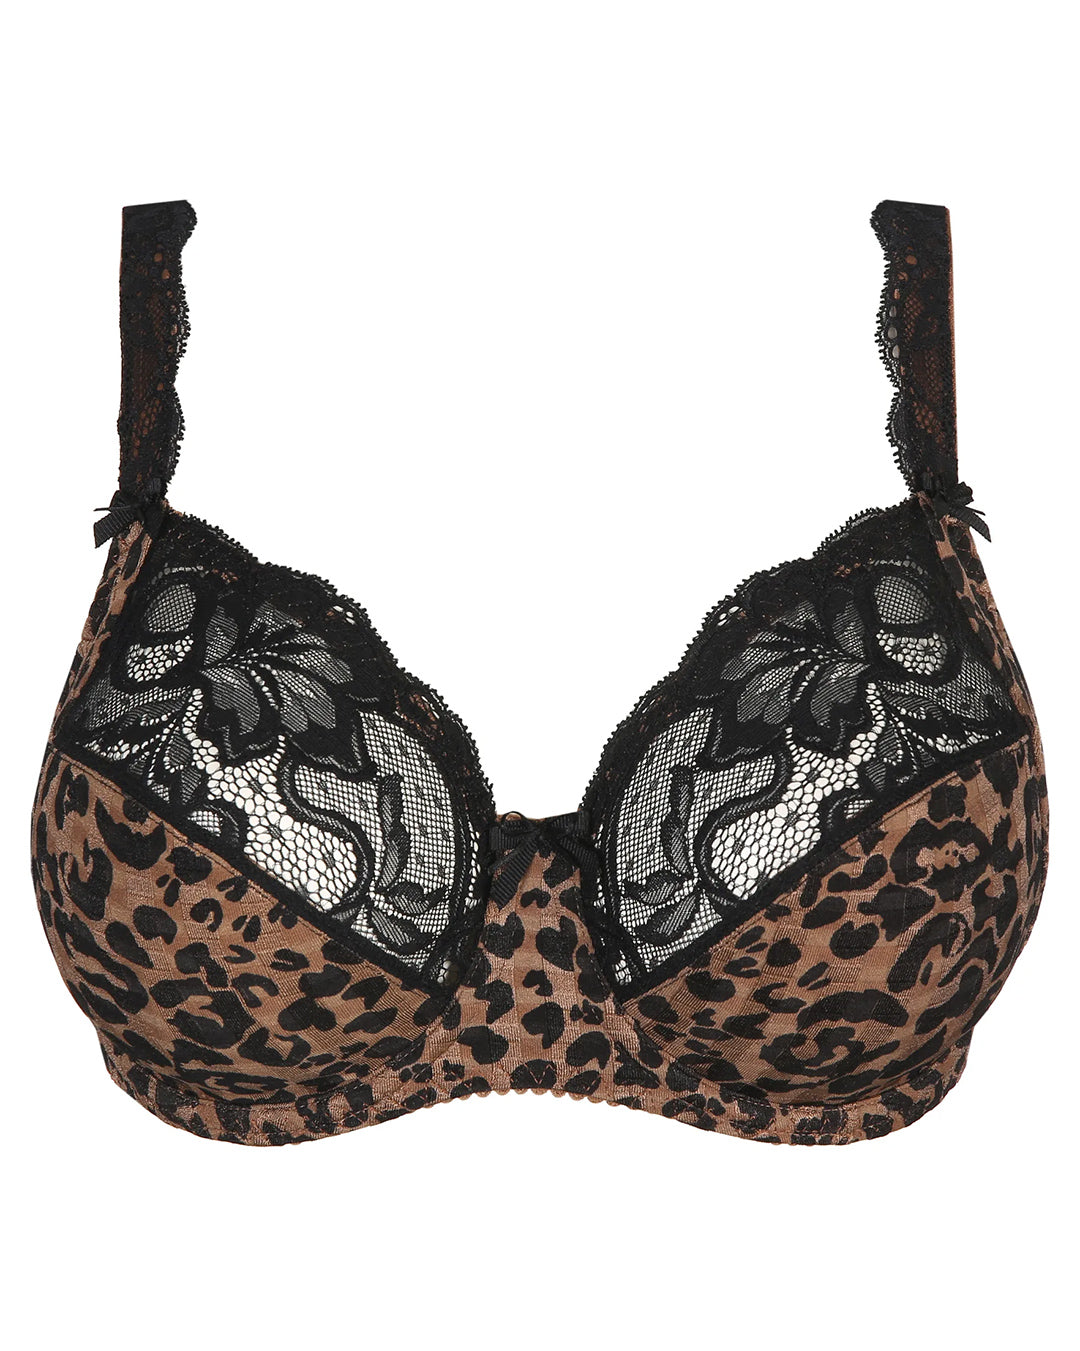 Cacique 38G Bra Red w/Black Lace Overlay